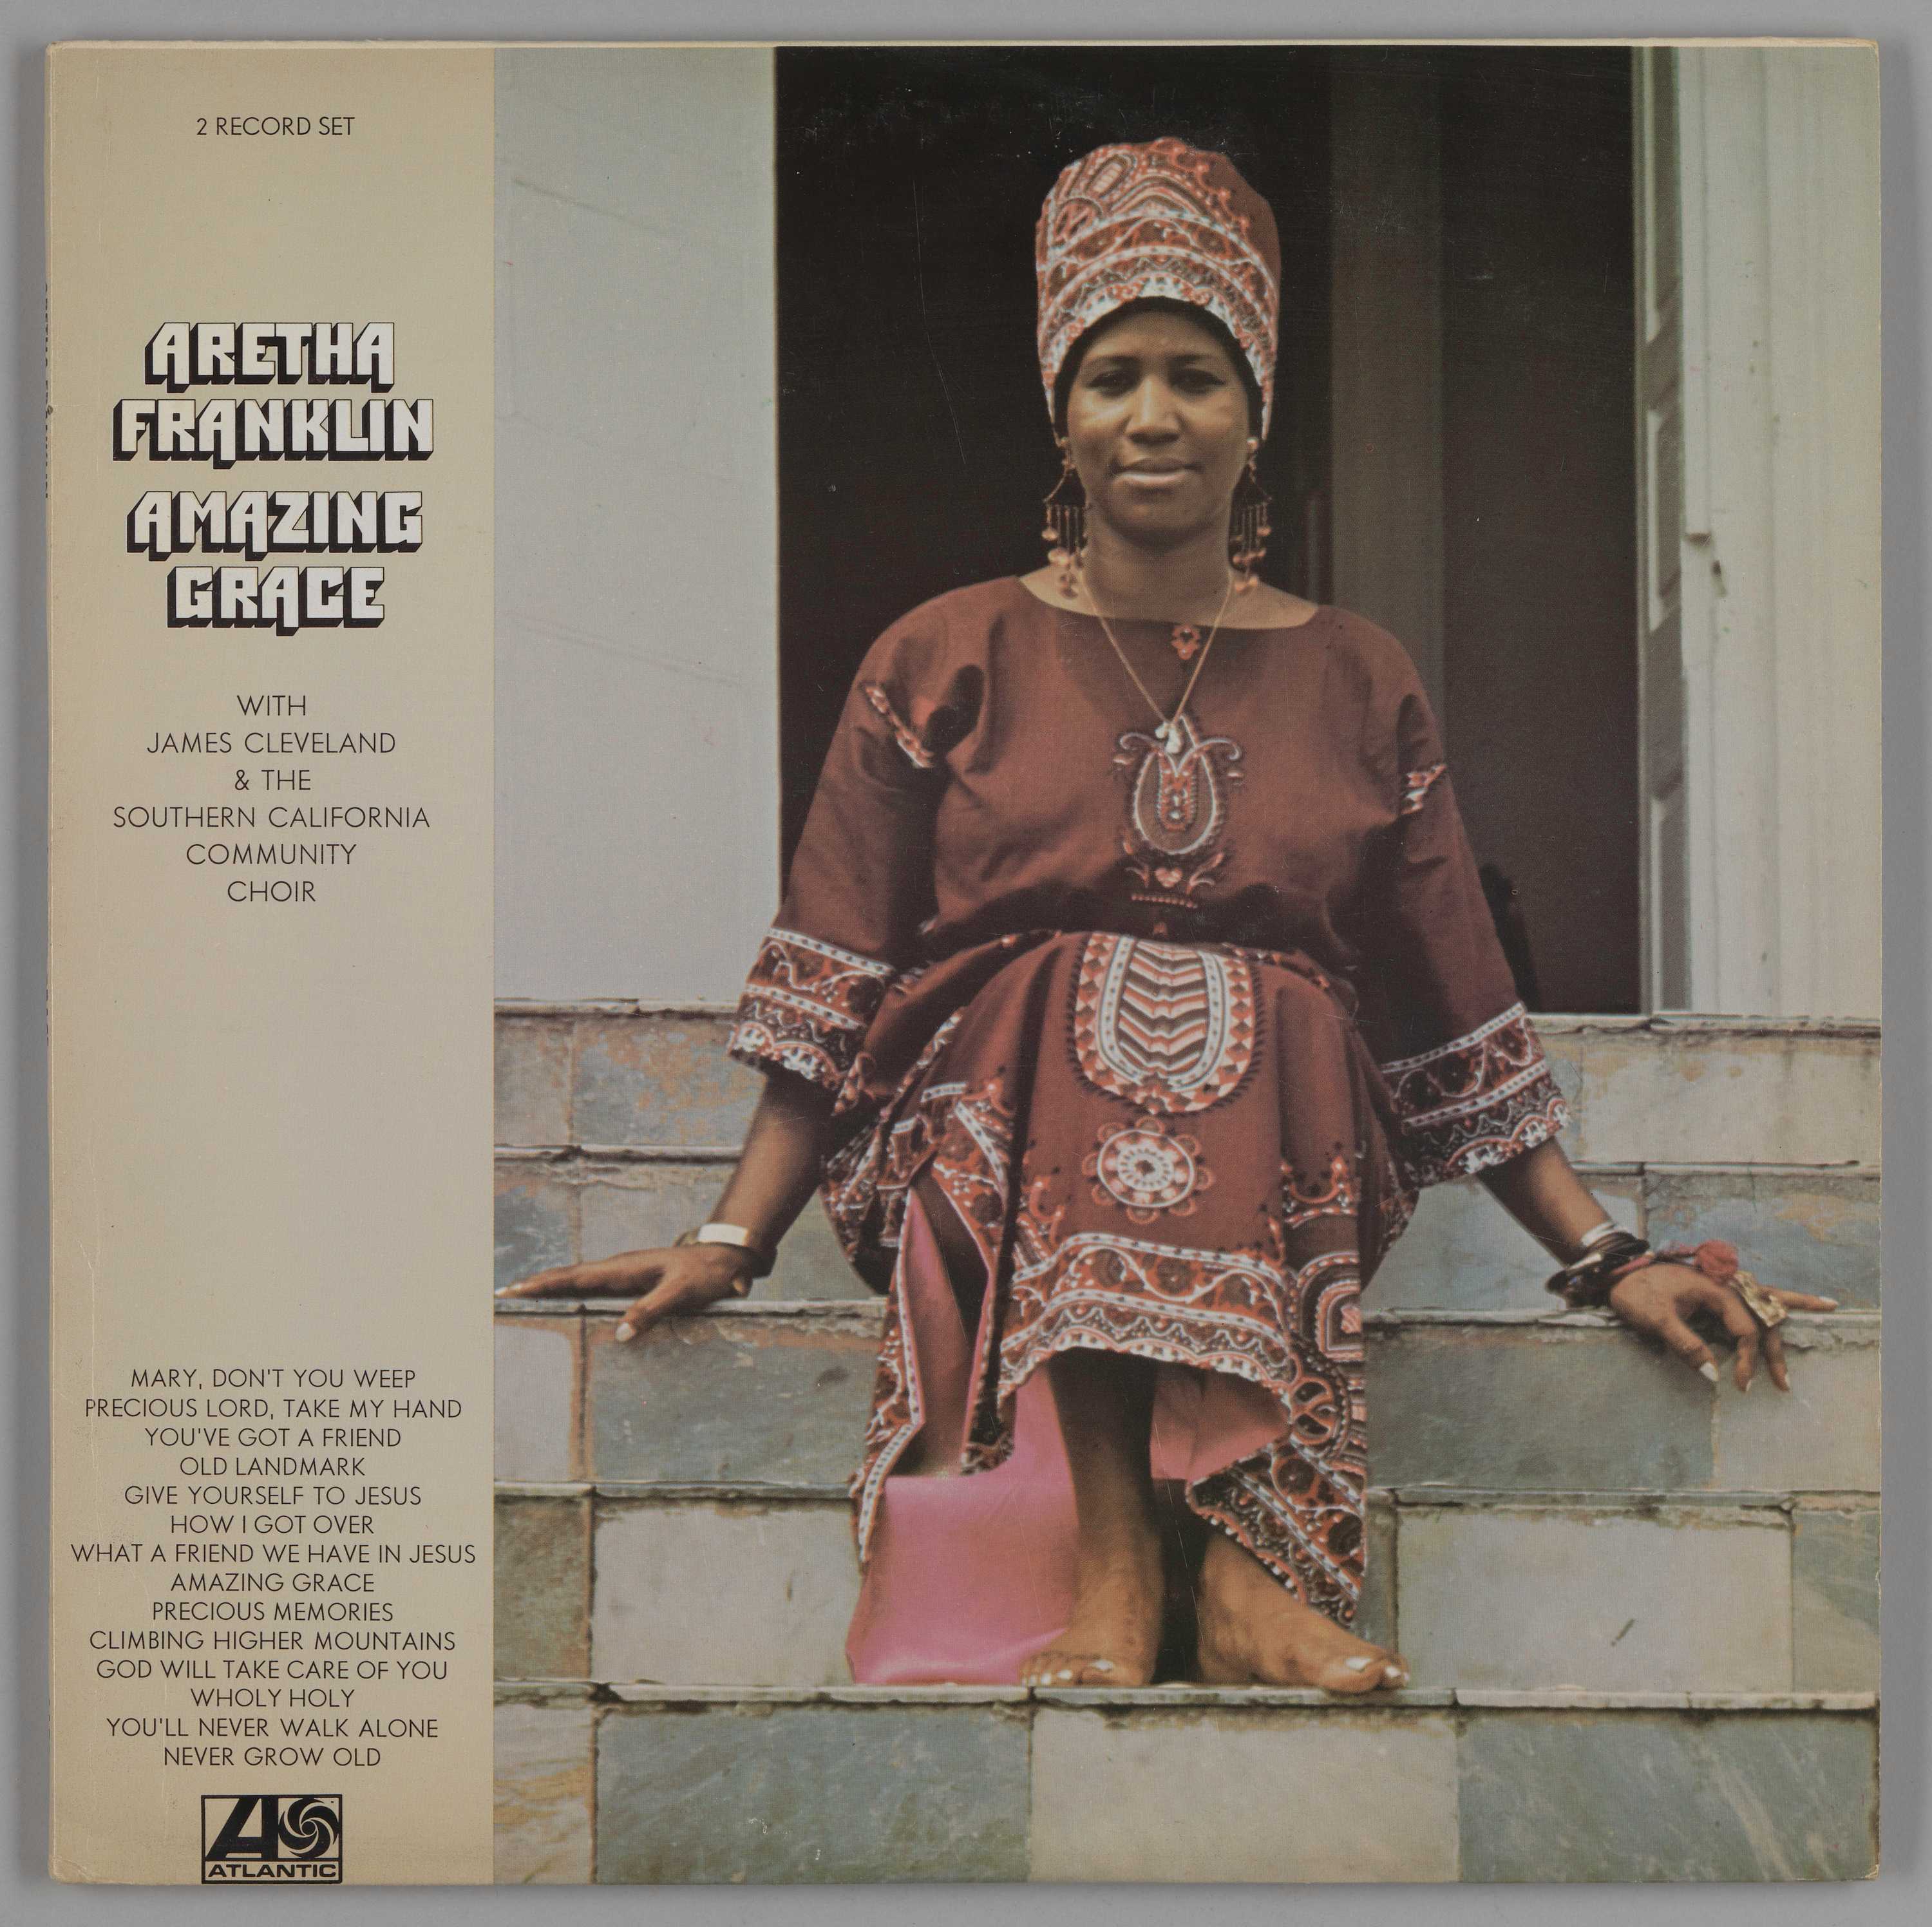 Image of the album jacket for Aretha Franklin's album Amazing Grace, featuring an image of Aretha Franklin sitting barefoot on steps in a pink dress and head wrap.